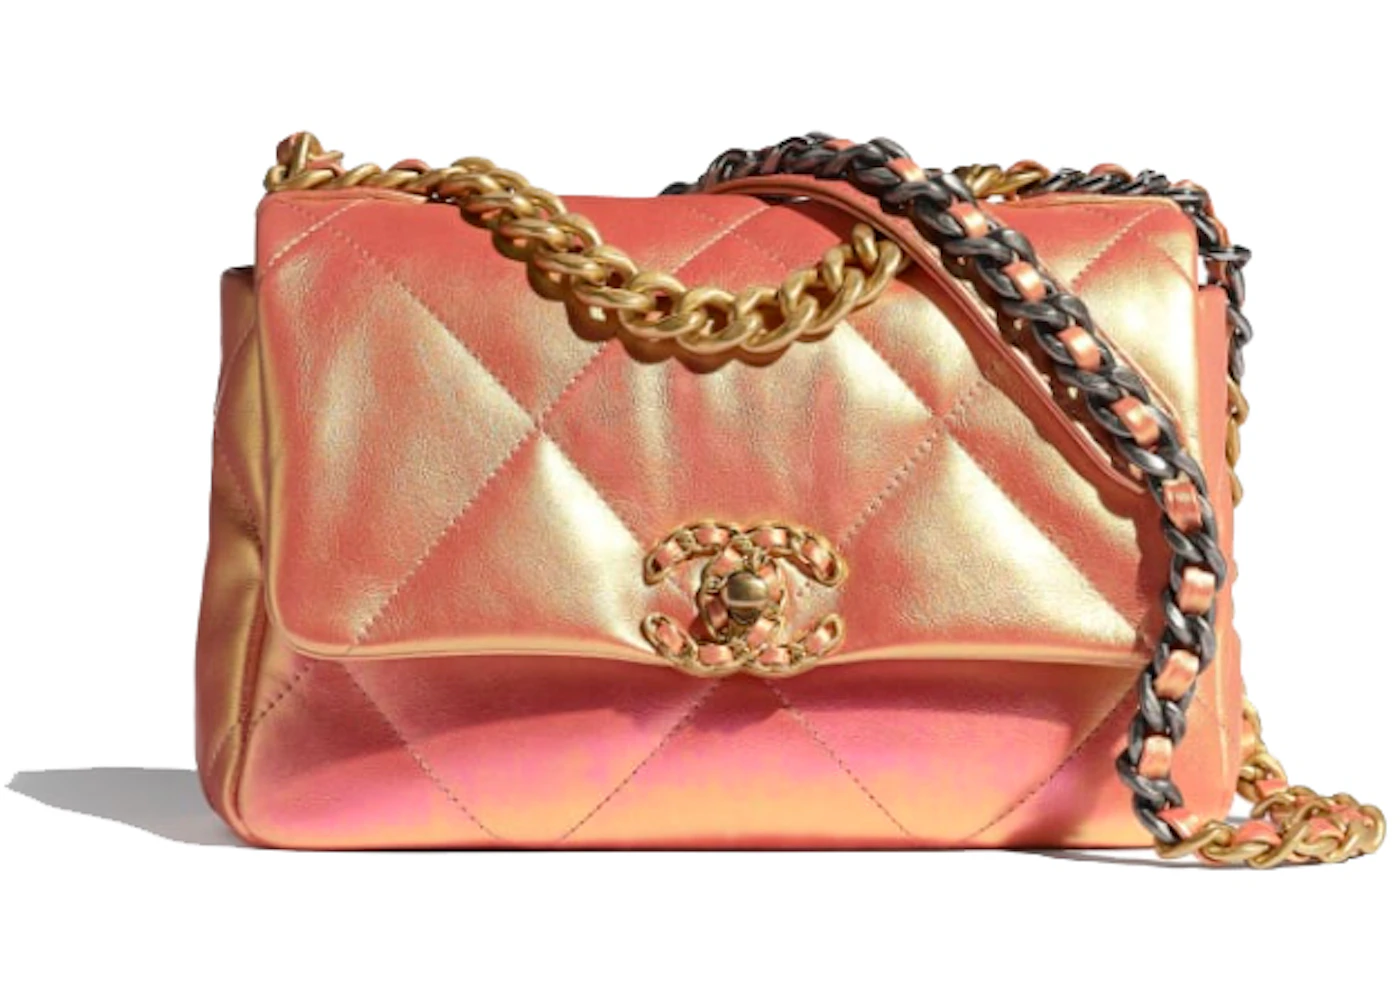 Chanel 19 Flap Bag Iridescent Pink in Calfskin Leather with Gold